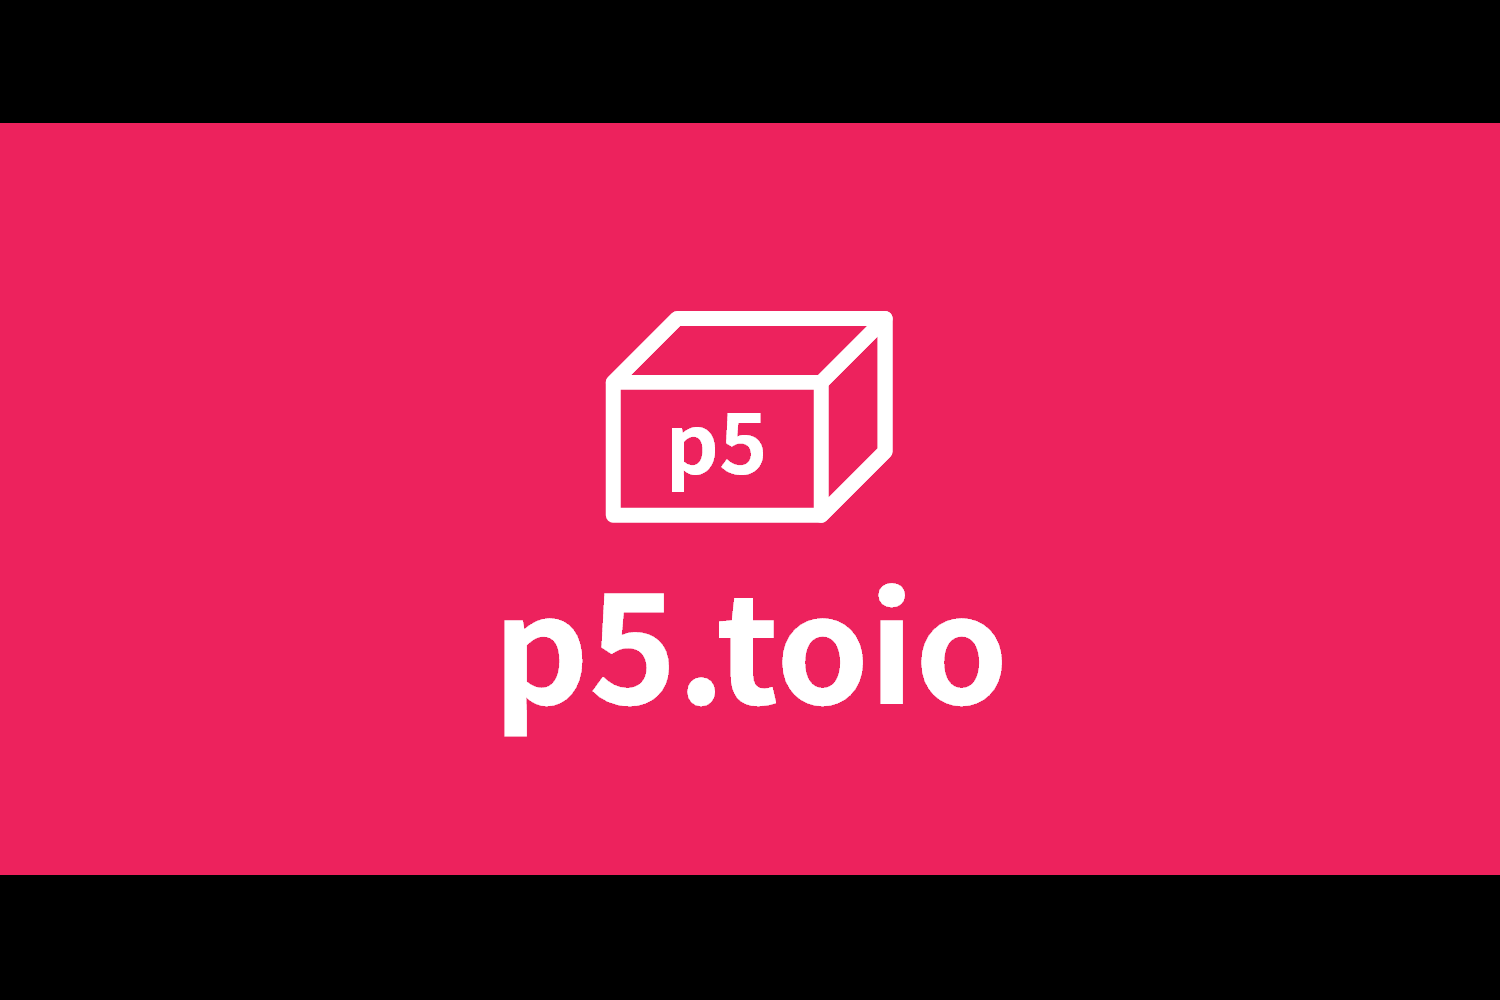 A logo and cube-shaped symbol of 'p5.toio' library are placed in the center.